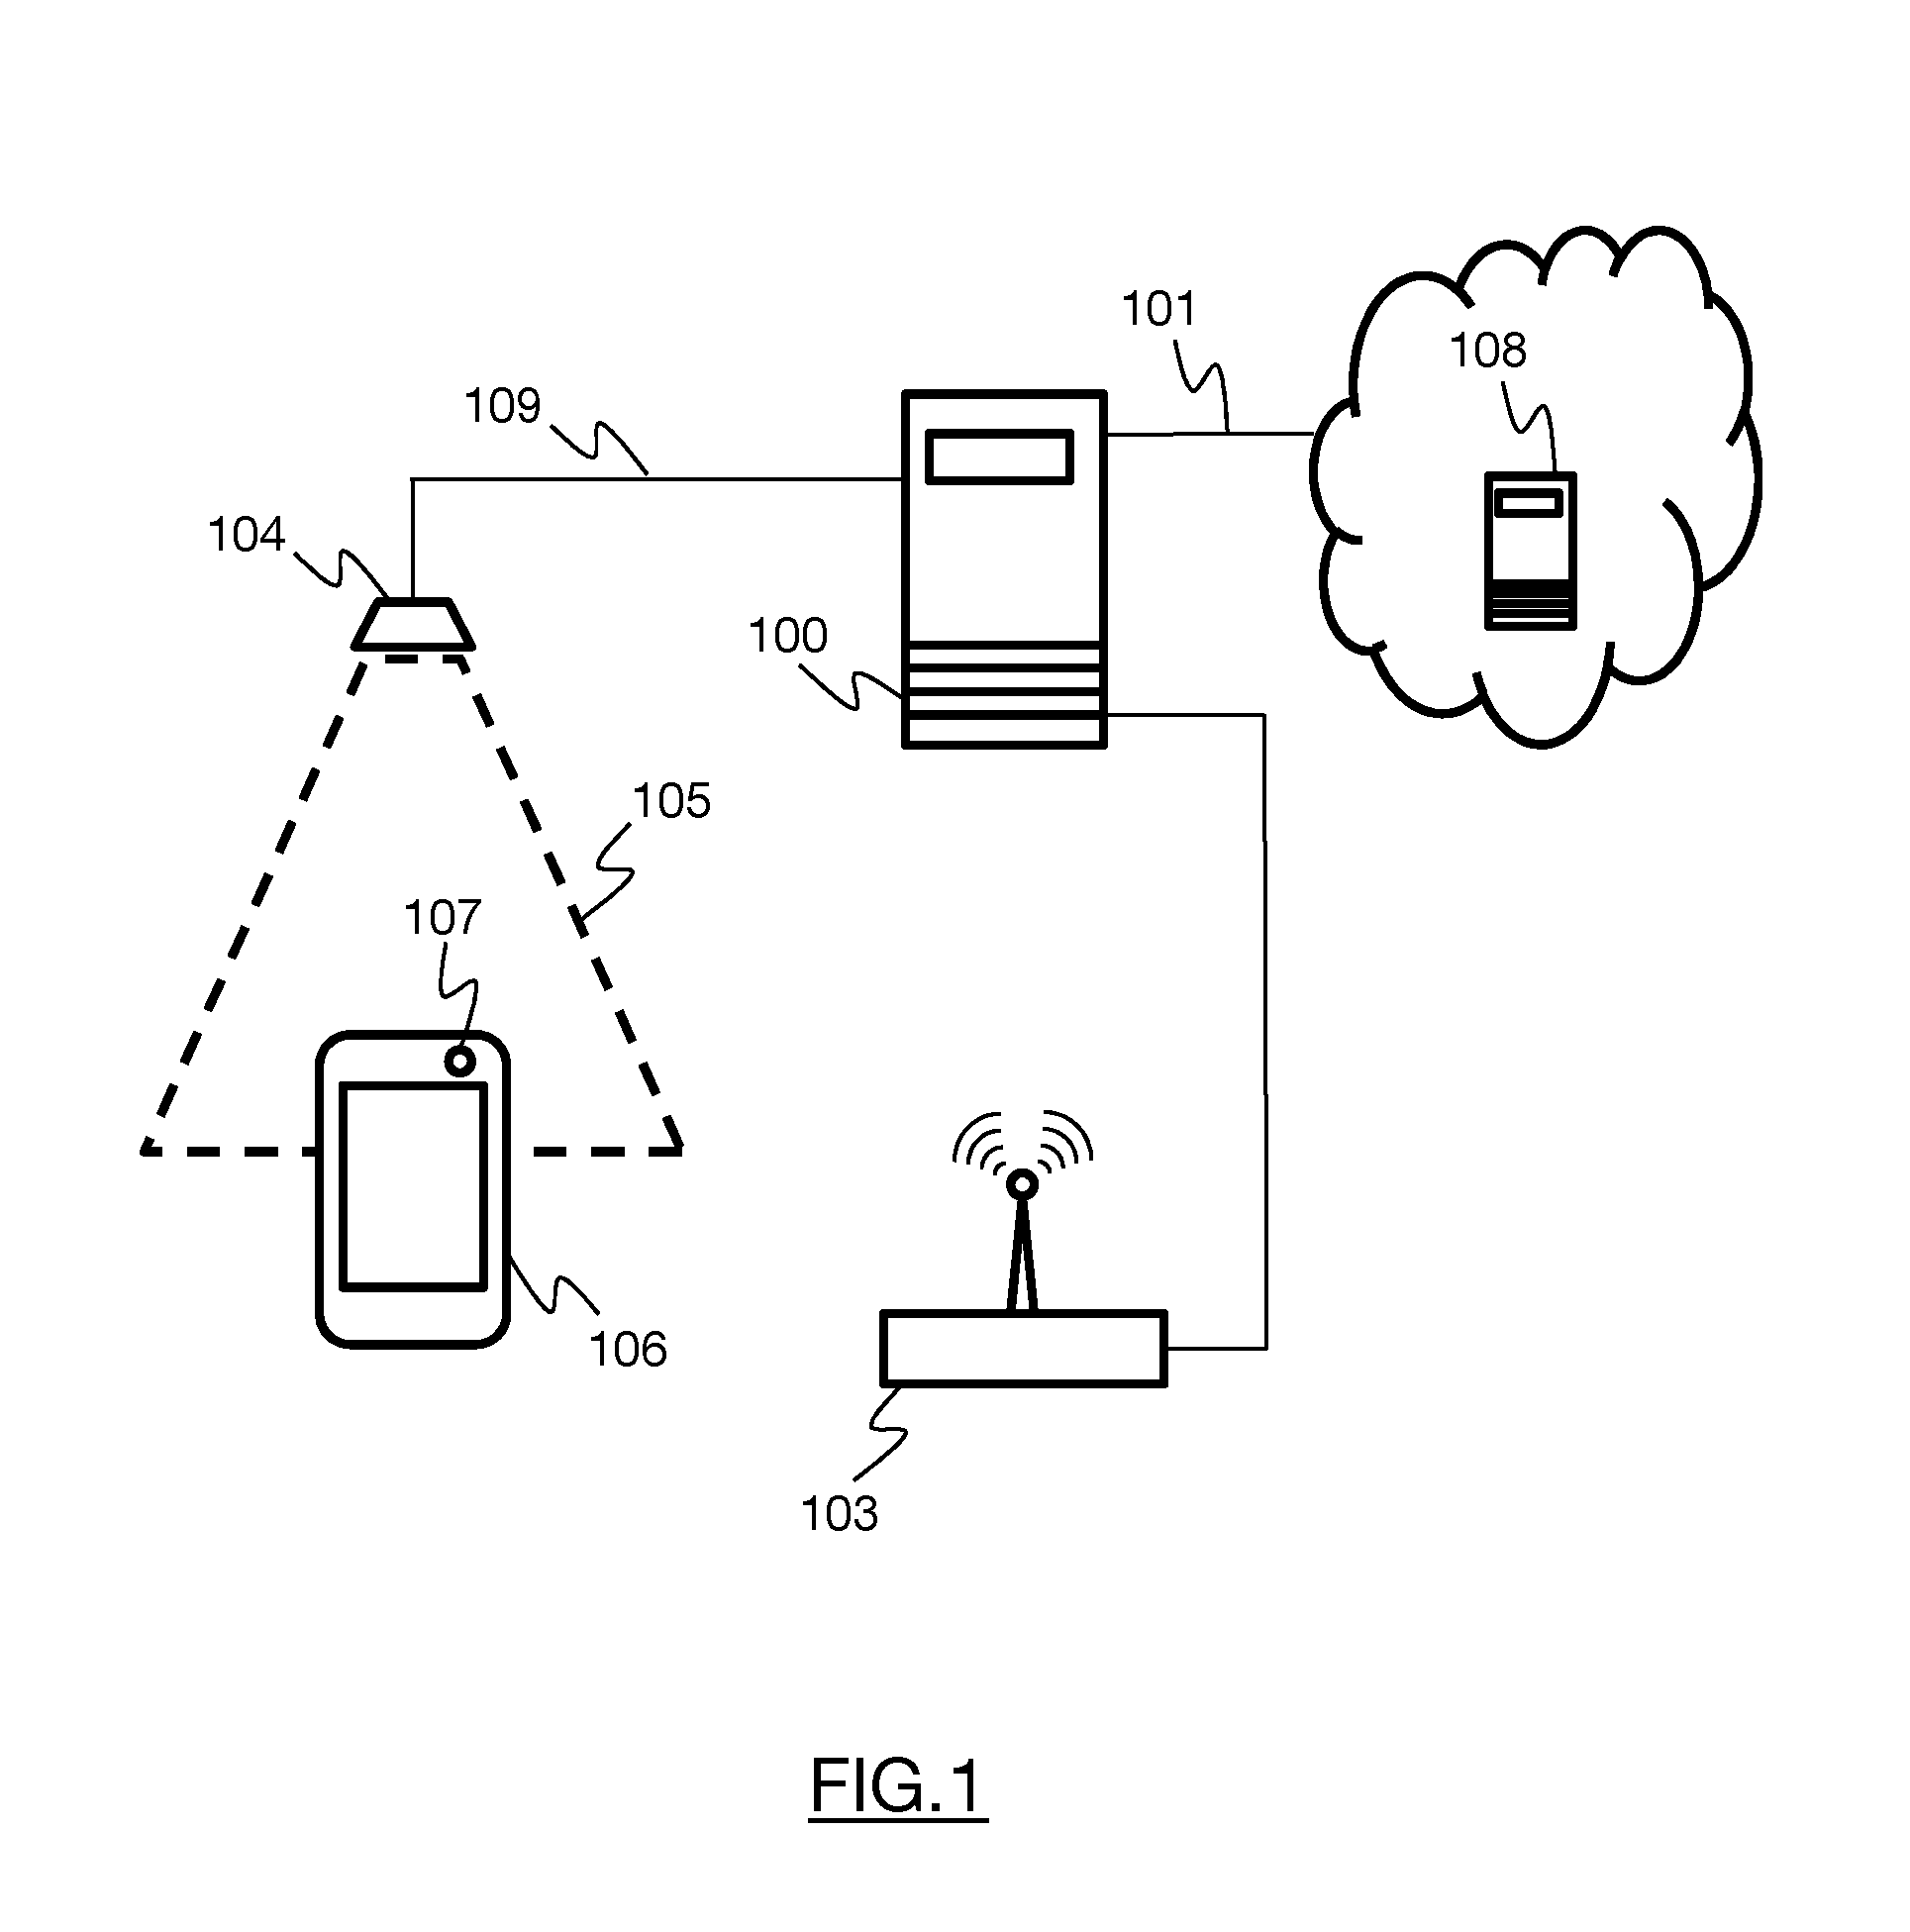 Method for controlling access to a service